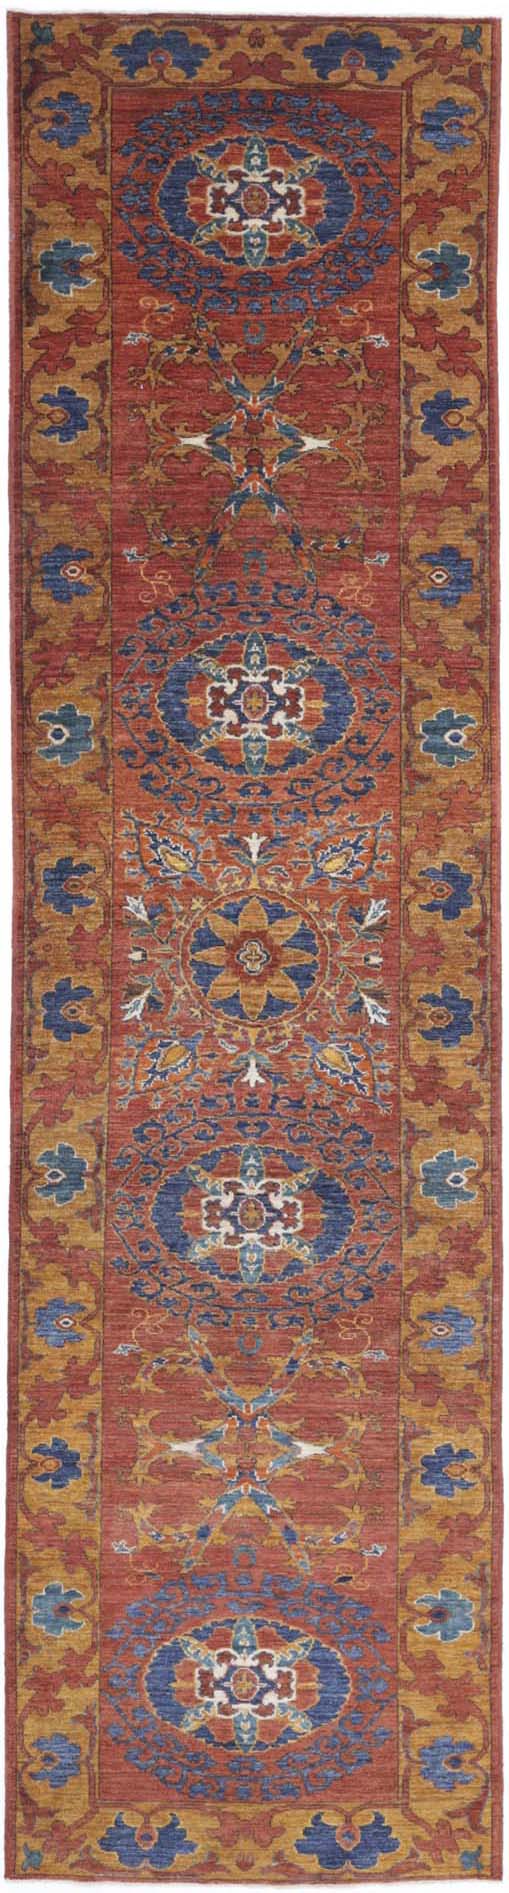 Hand Knotted Nomadic Caucasian Humna Wool Rug - 3'3'' x 14'0''